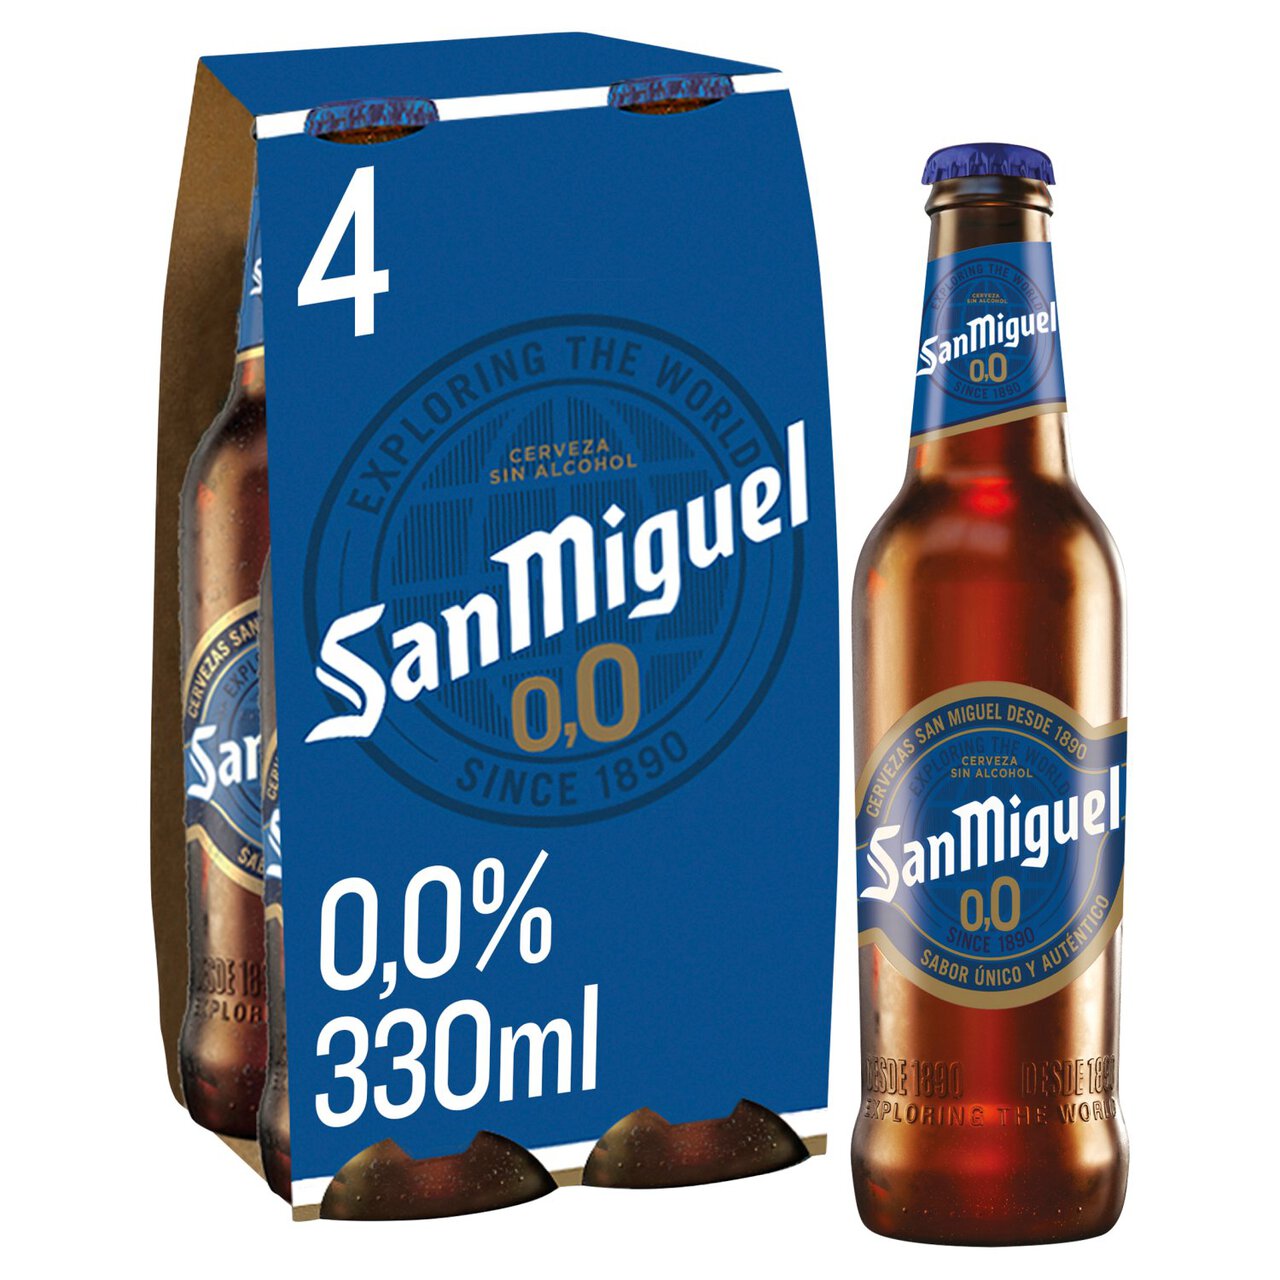 San Miguel Alcohol Free Lager Beer Bottles 4 x 330ml